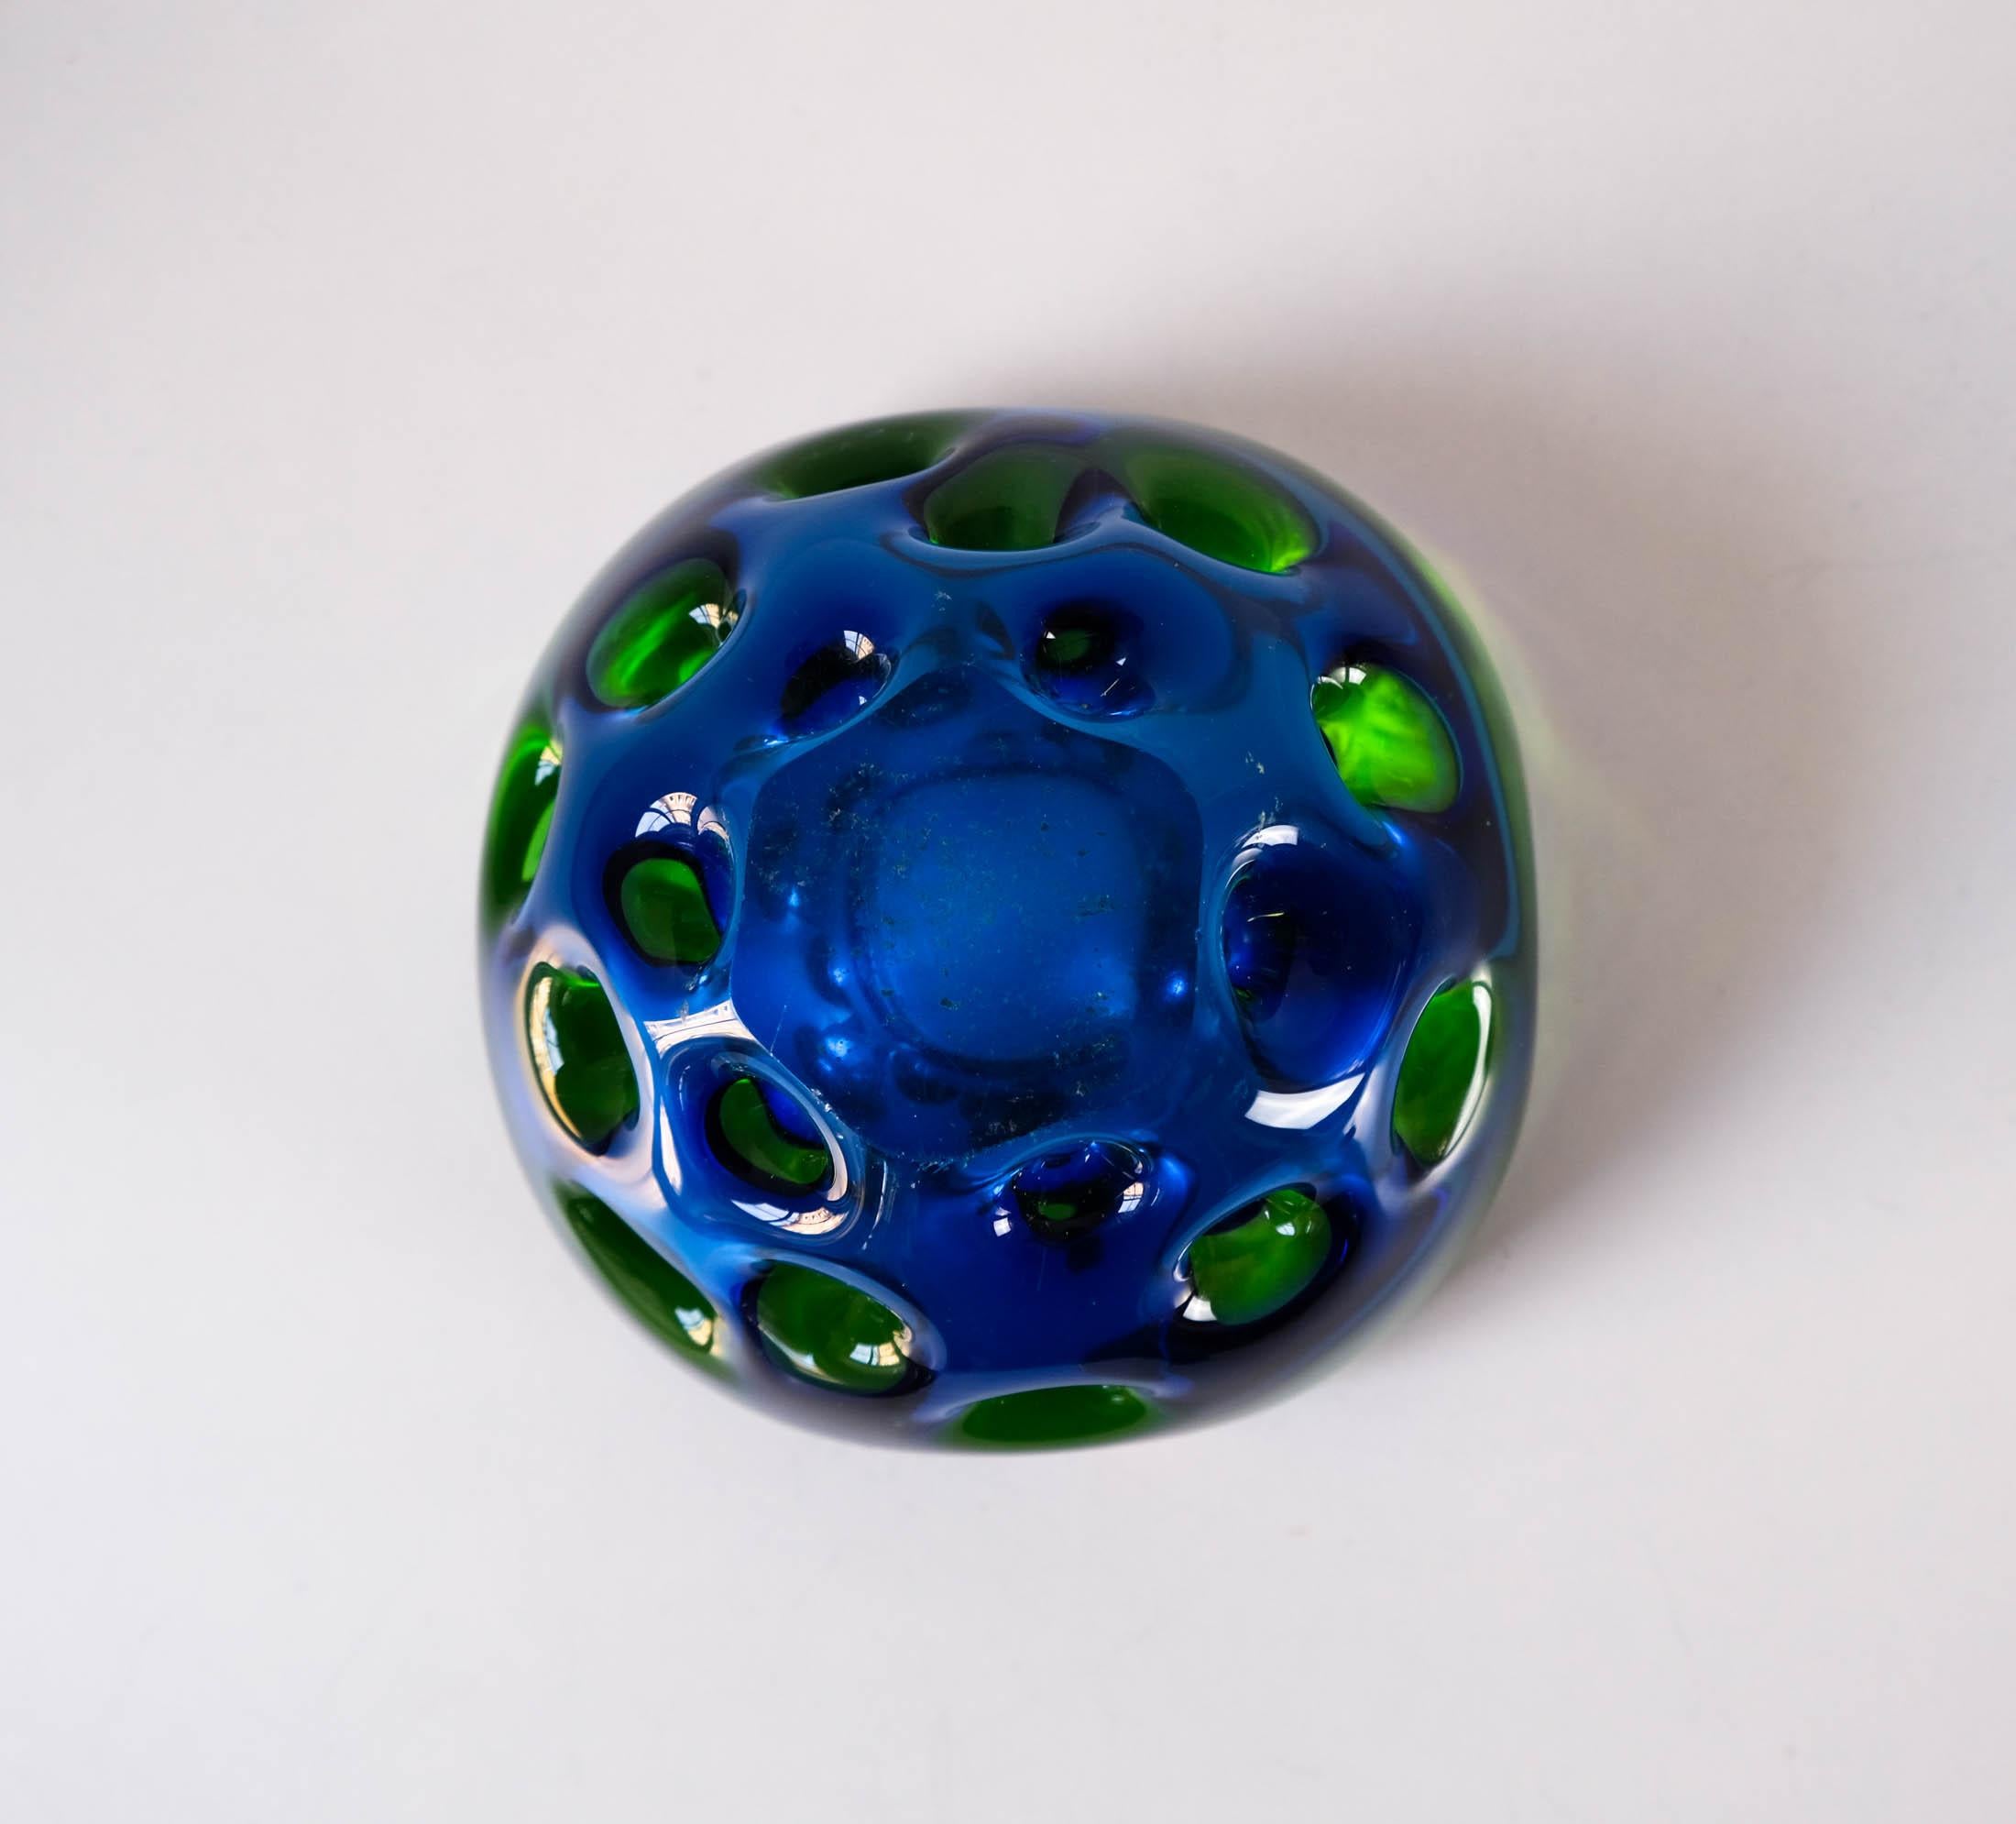 Glass Murano Blue Green Sommerso Dimpled Geode Bowl by Galliano Ferro, c.1960s For Sale